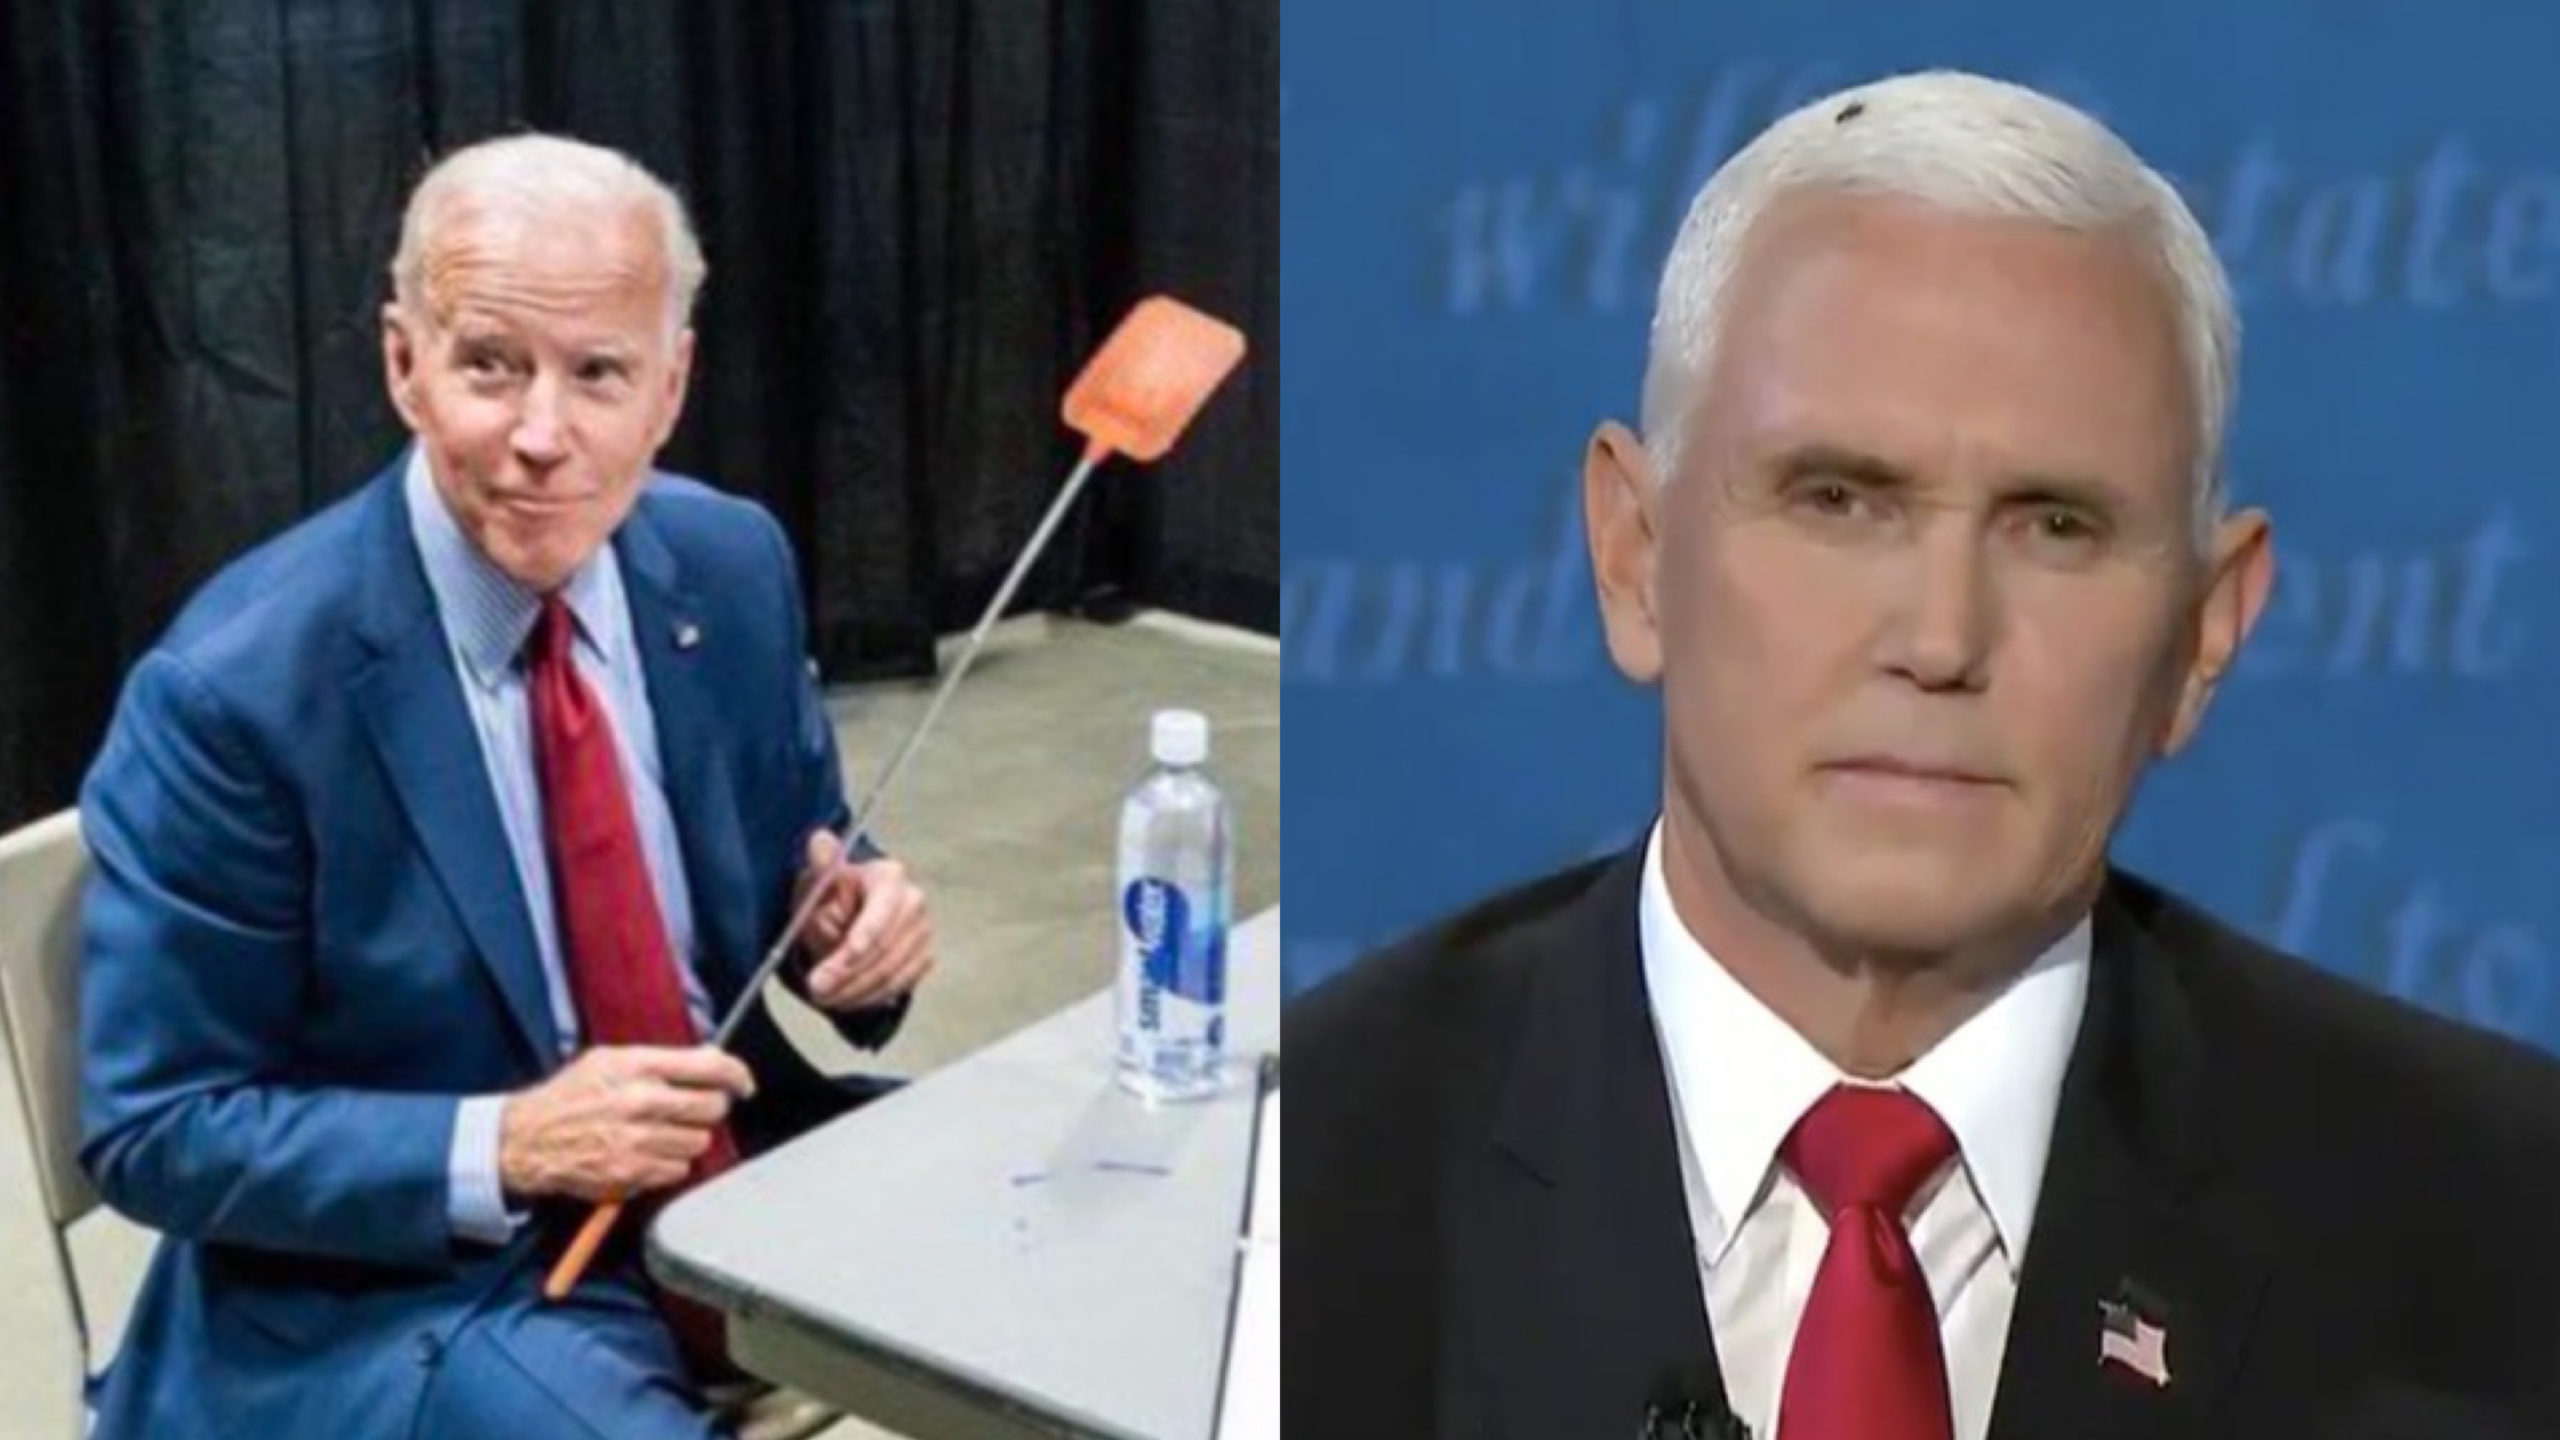 Biden Campaign Sells Out Of Truth Over Flies Fly Swatters Two Hours After Vice Presidential Debate